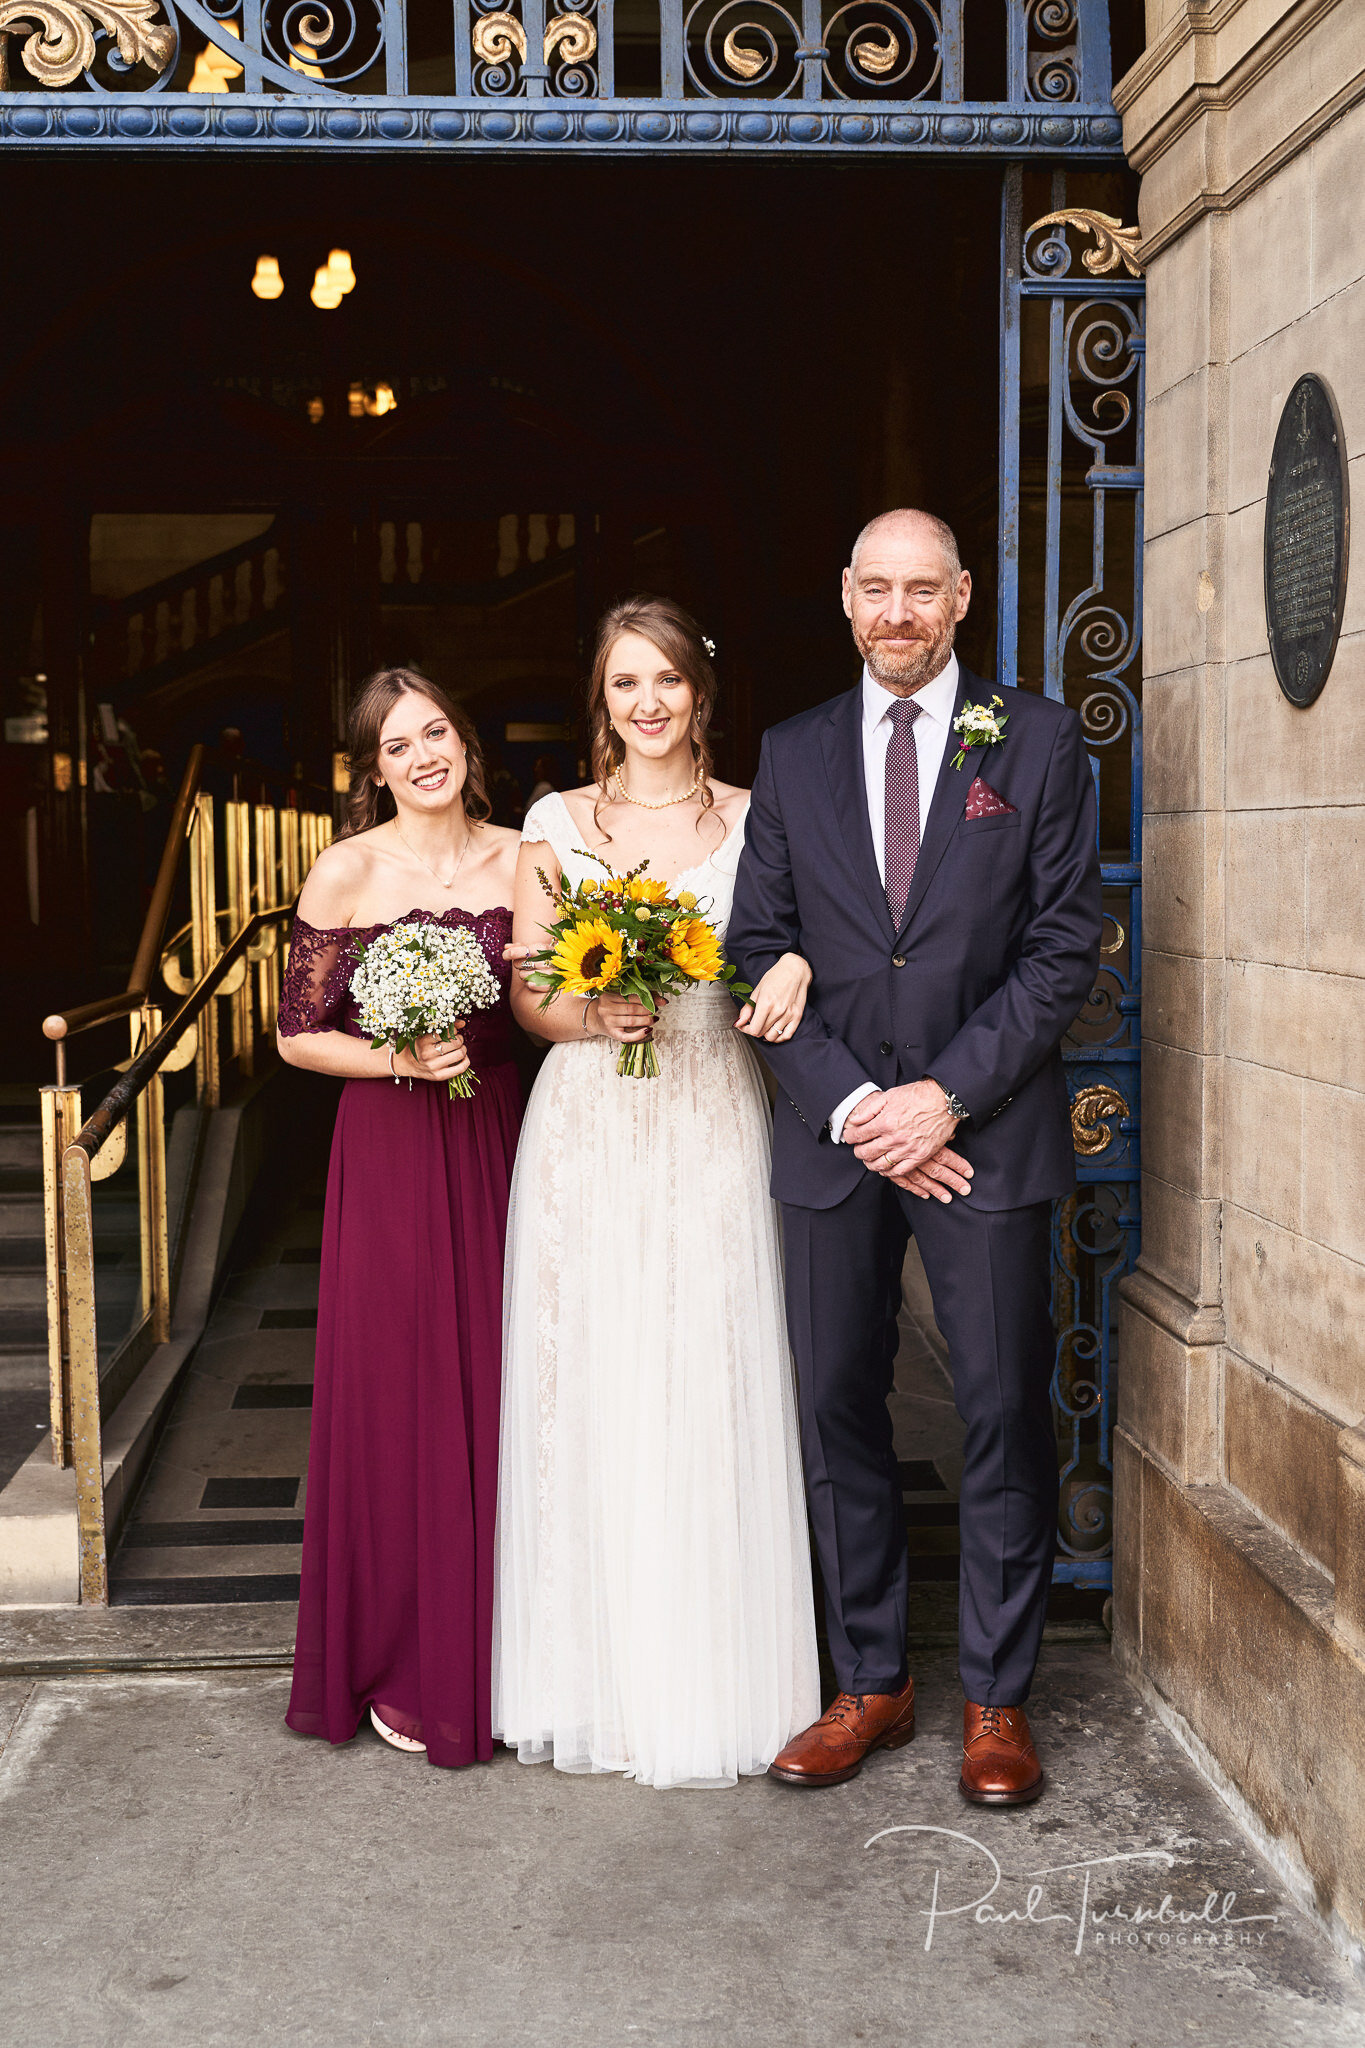 The Bridal Party. Wedding Photography at Sheffield Town Hall